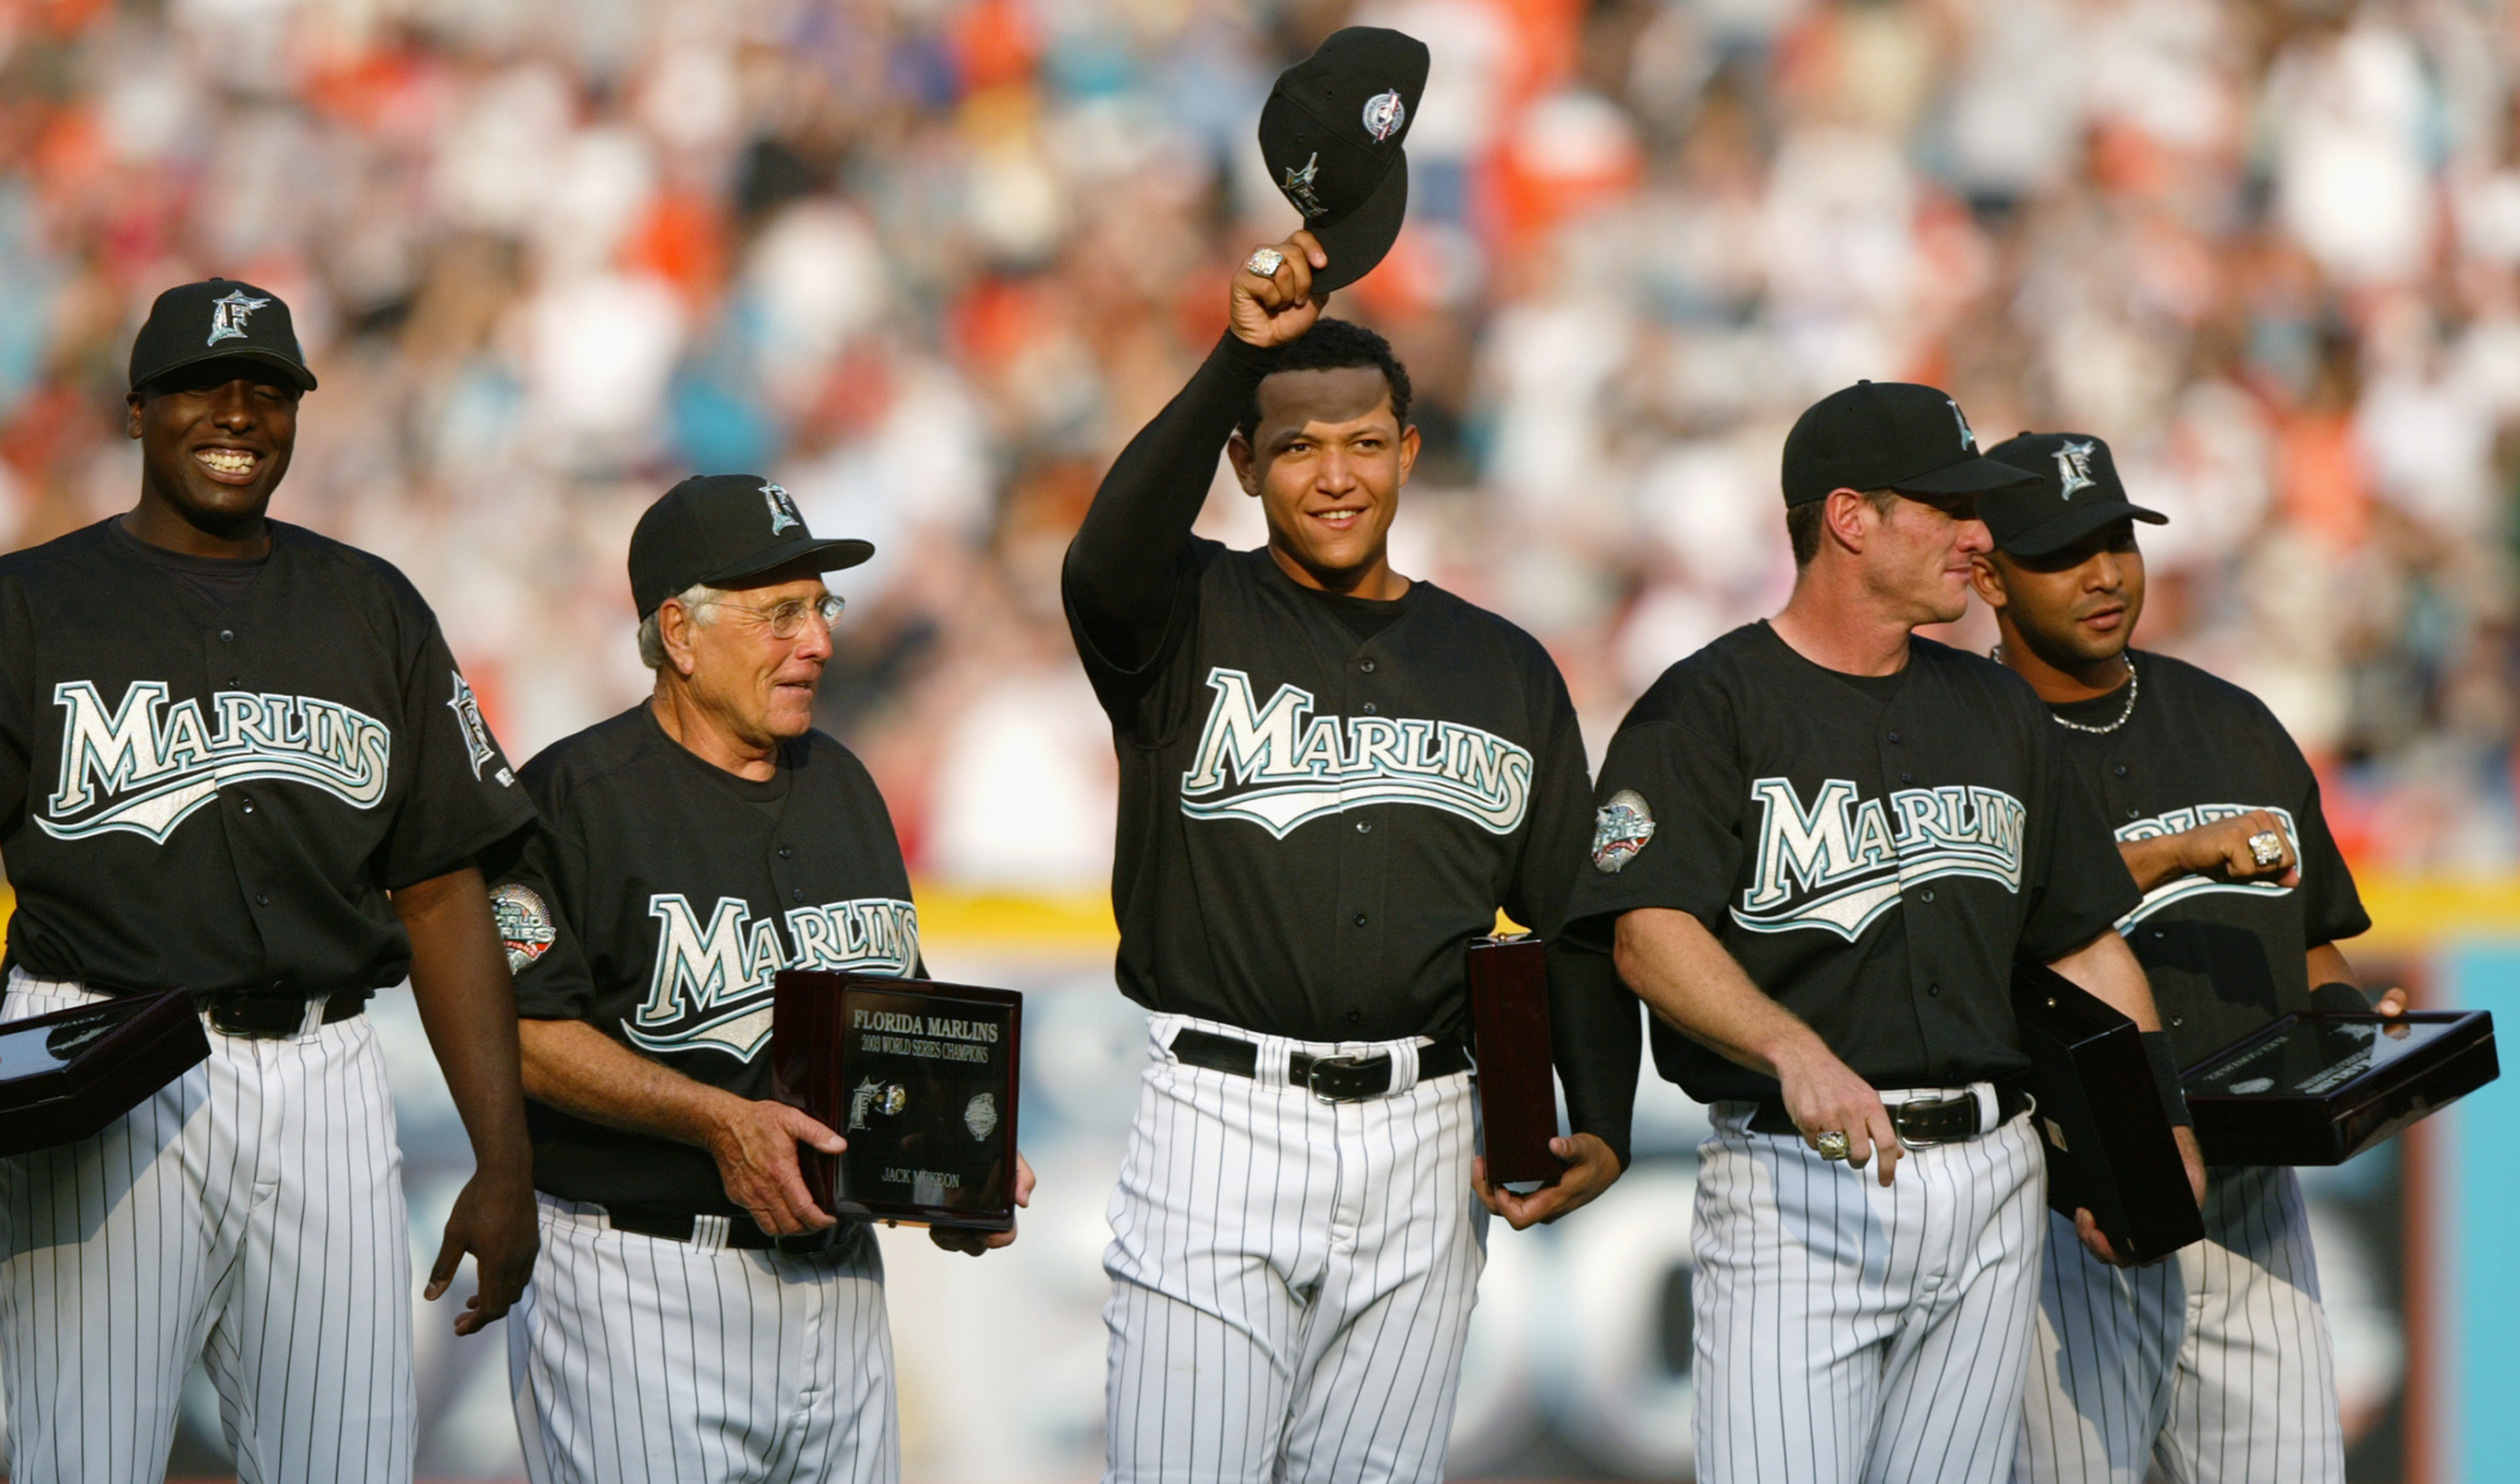 Why don't the Miami Marlins have any retired numbers? - Page 3